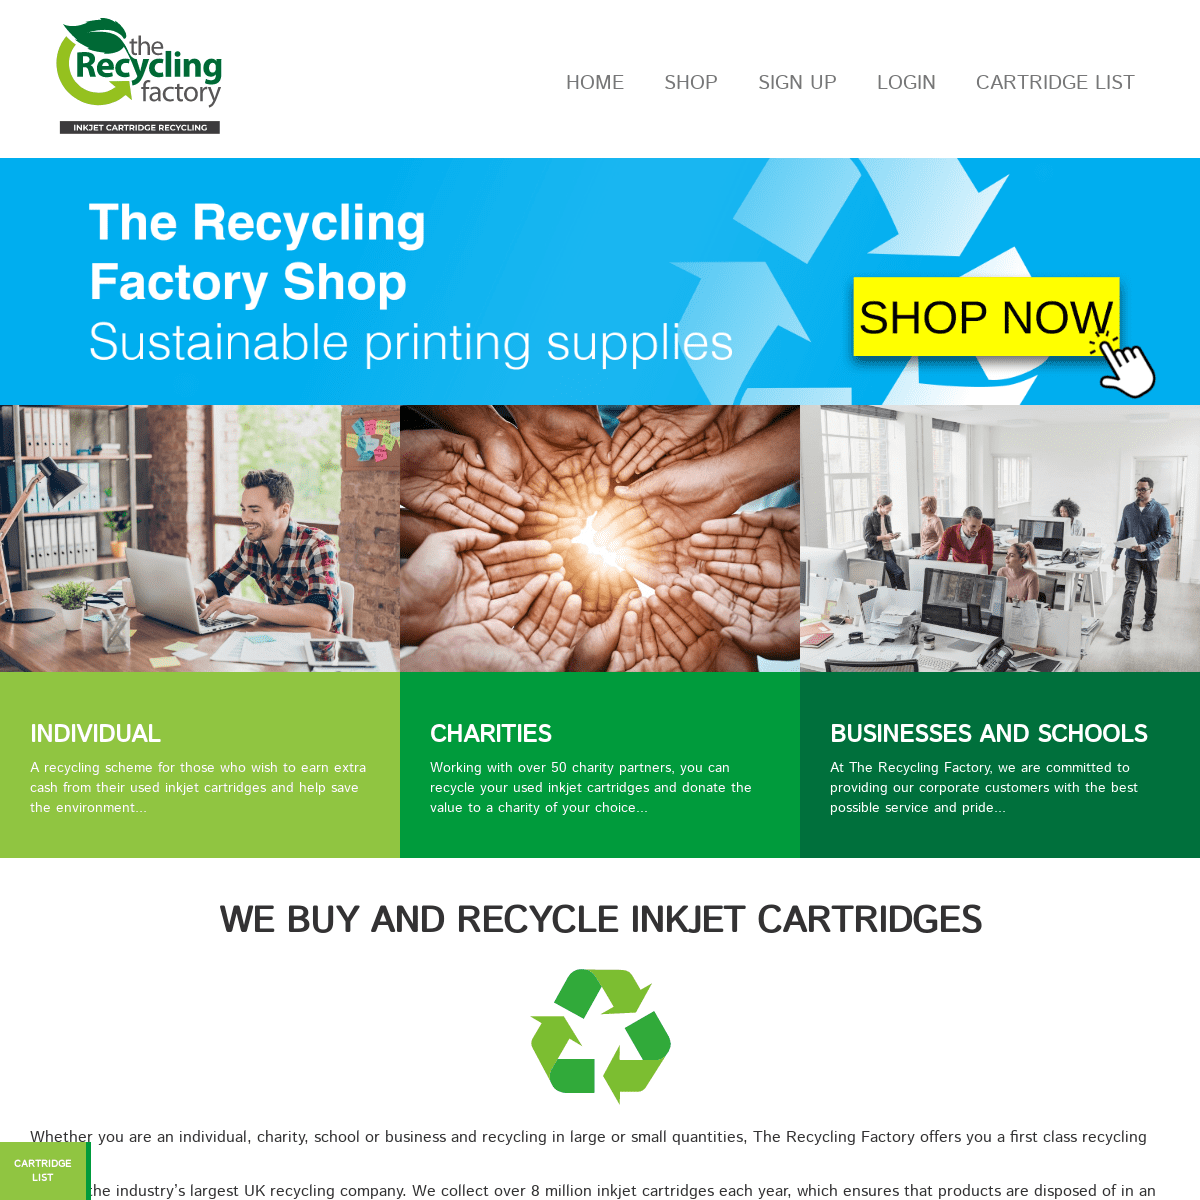 A complete backup of https://therecyclingfactory.com